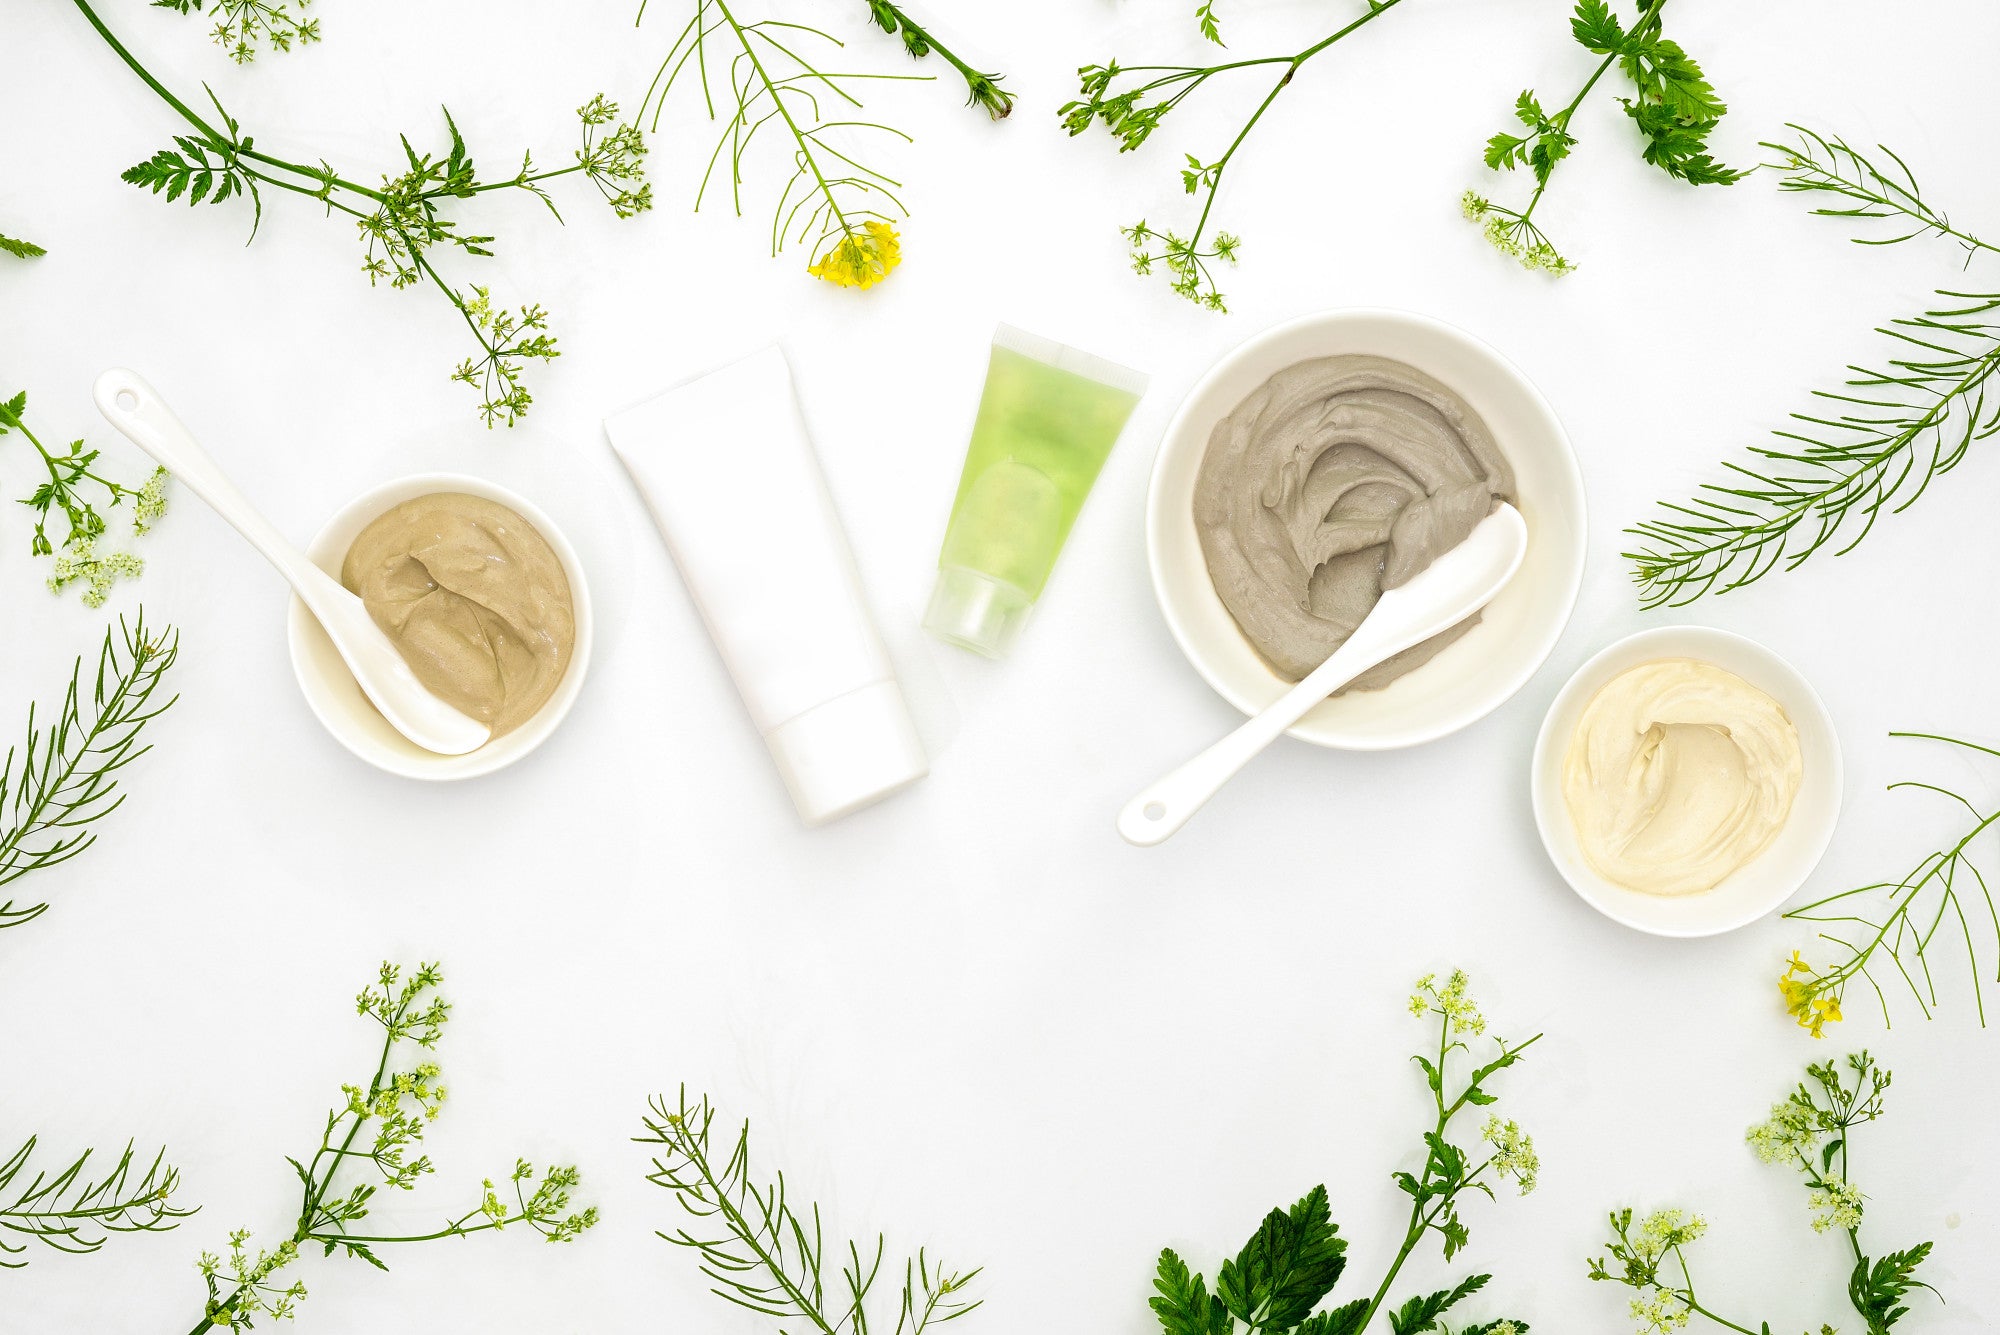 Going Green: How to Create an Eco-Friendly Beauty Regimen